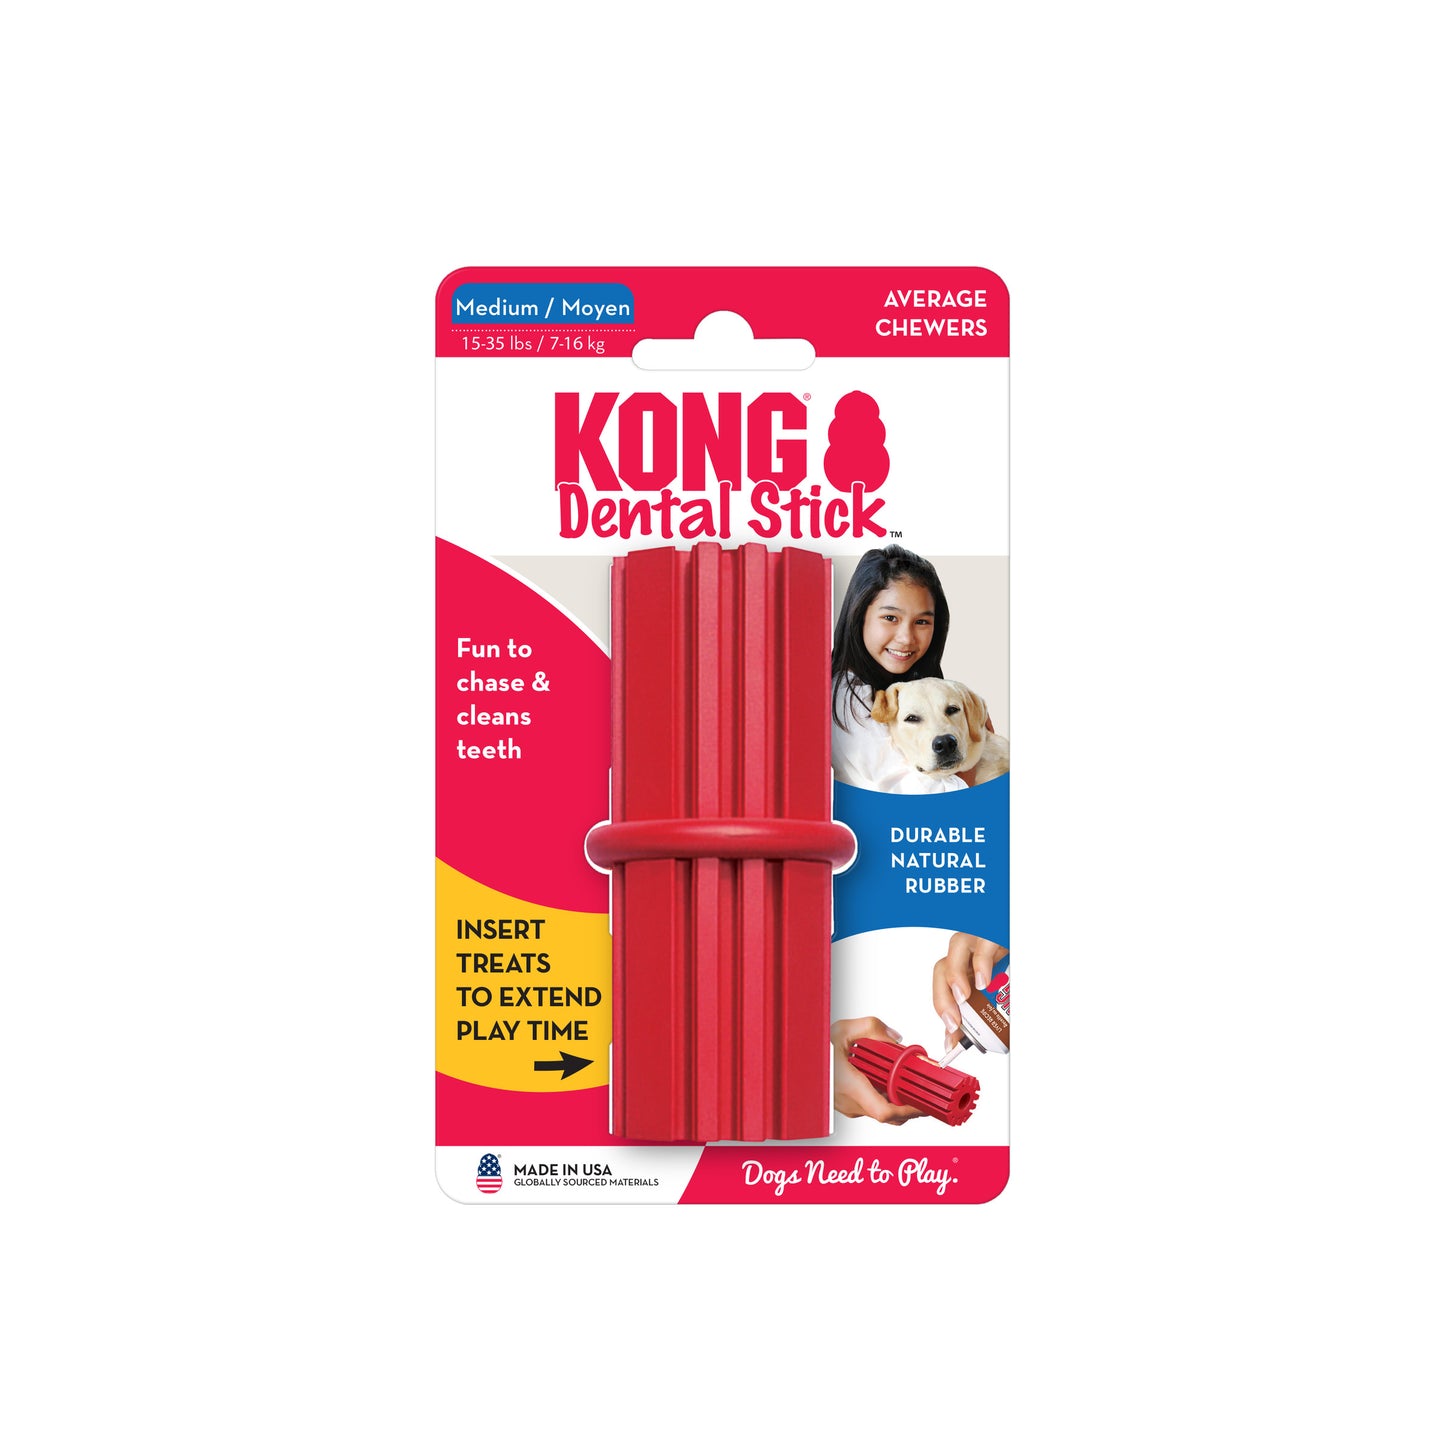 Introducing the SALE: KONG Dental Stick, an innovative dental care solution for dogs that effectively promotes healthy teeth and gums from Your Whole Dog.